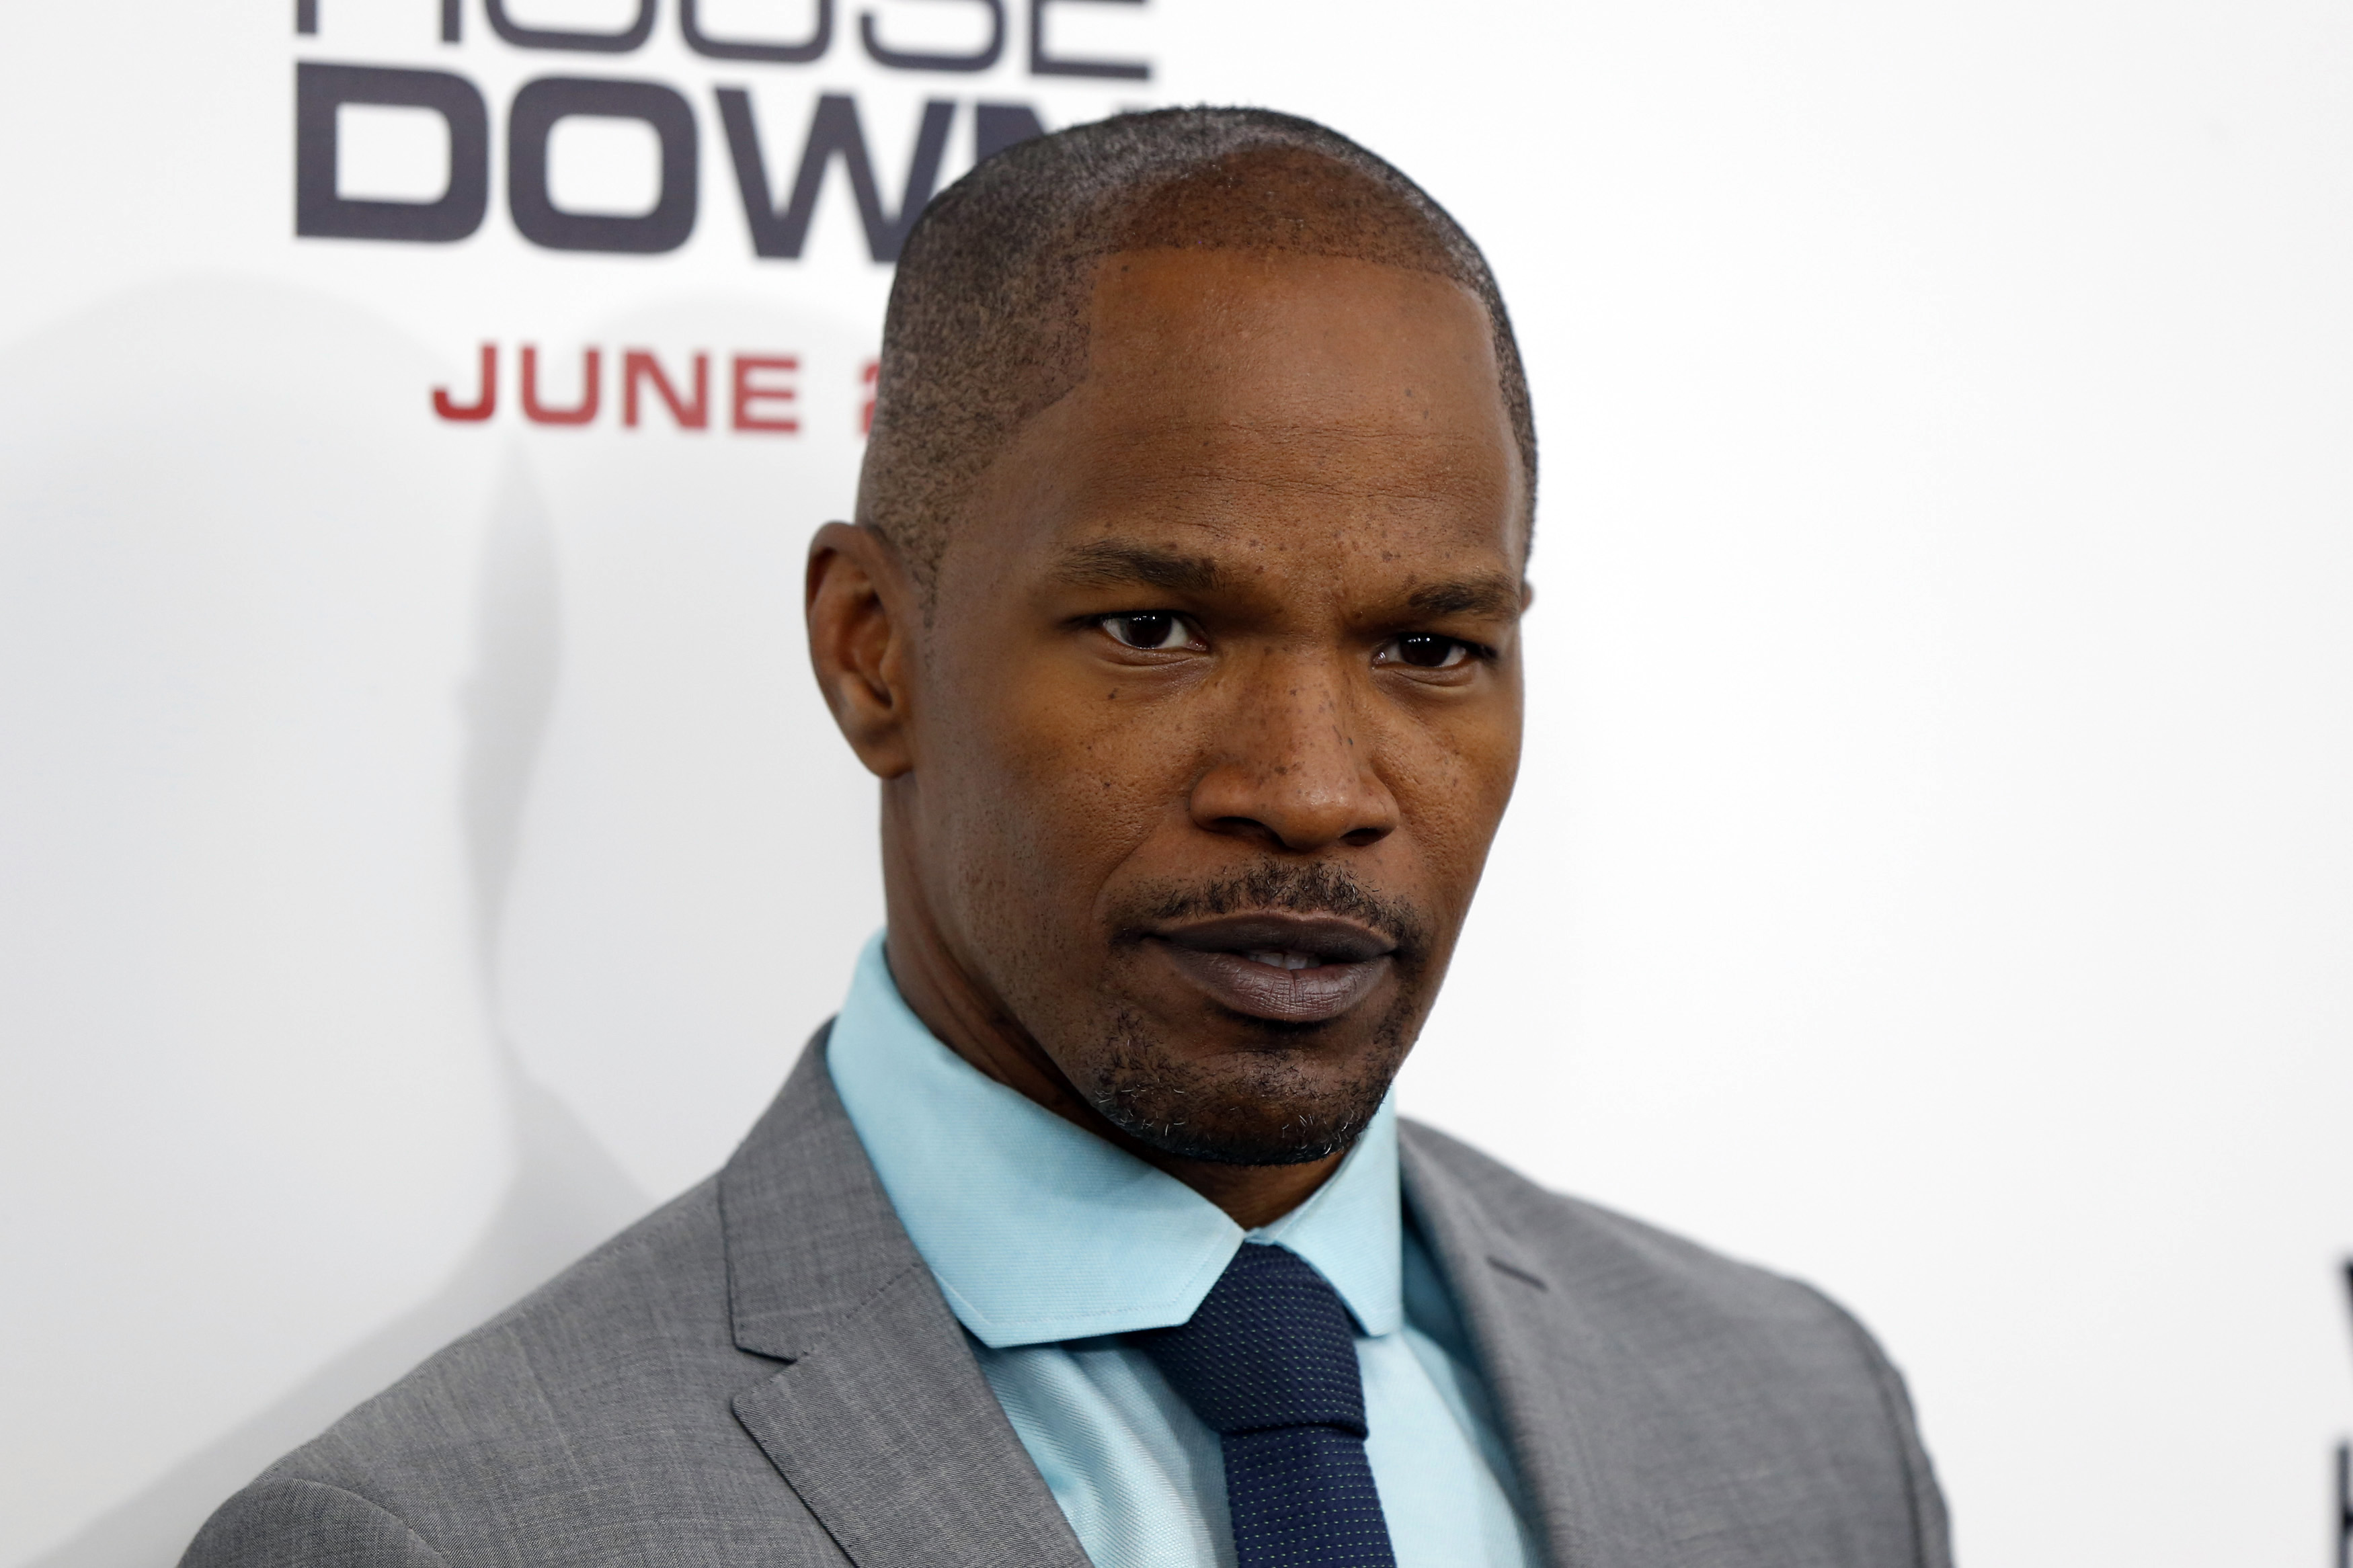 Cast member Jamie Foxx arrives for the premiere of the film "White House Down" in New York